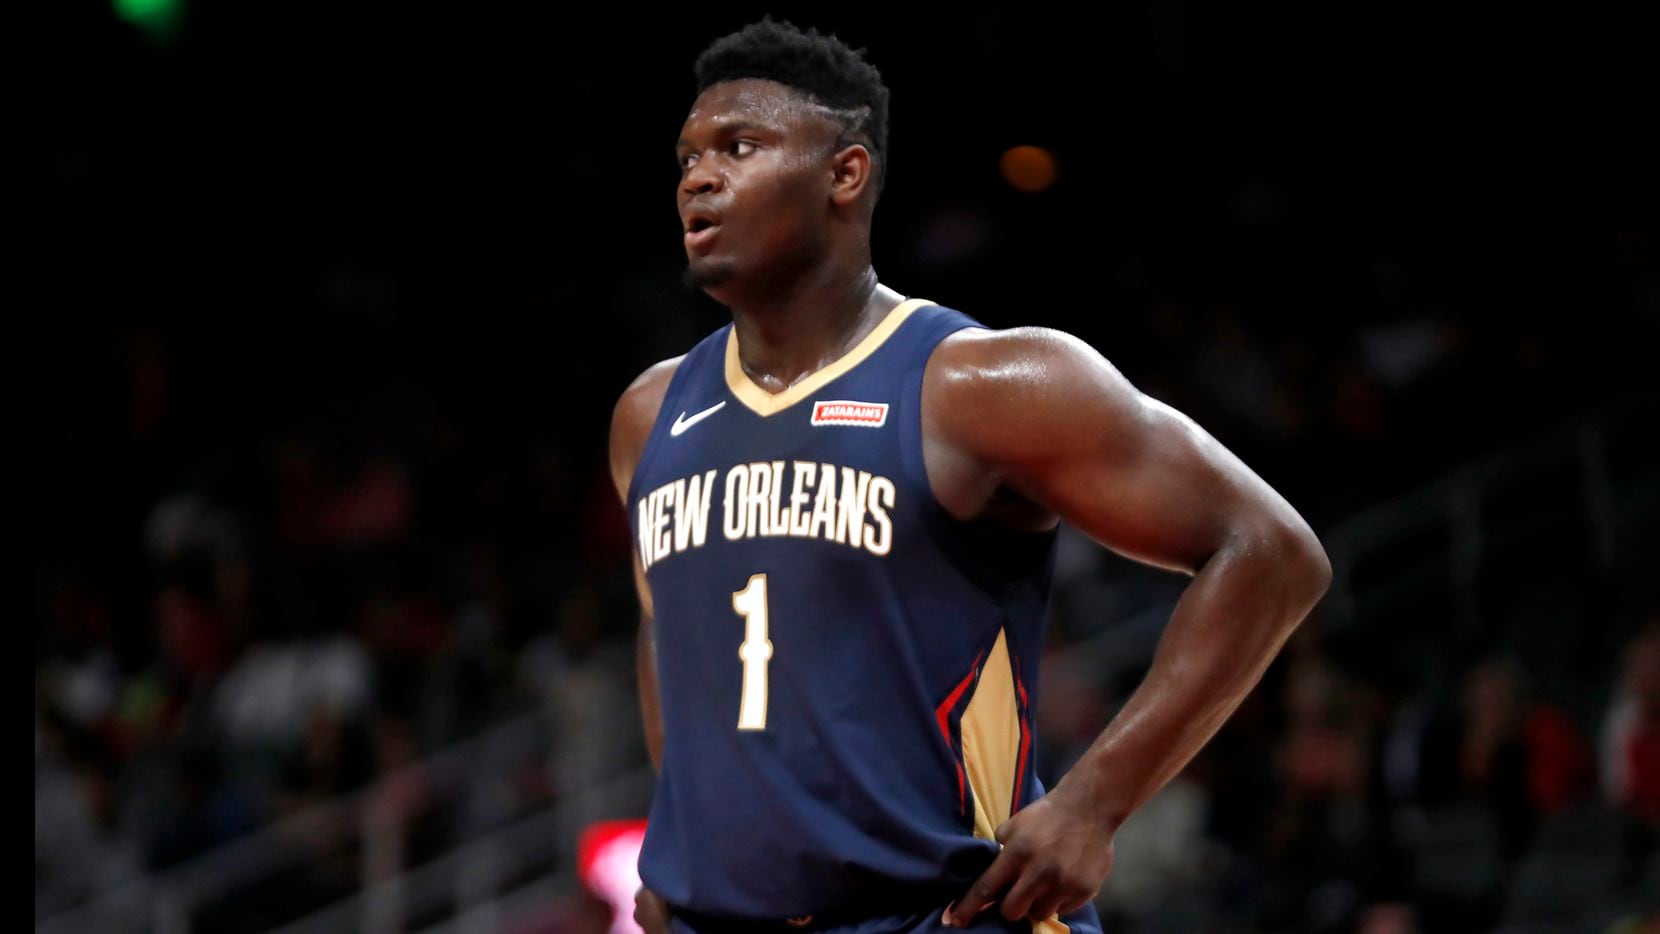 New Orleans Pelicans forward Zion Williamson (1) is shown during the first half of a preseason NBA basketball game against the Atlanta Hawks Monday, Oct. 7, 2019, in Atlanta. (AP Photo/John Bazemore)